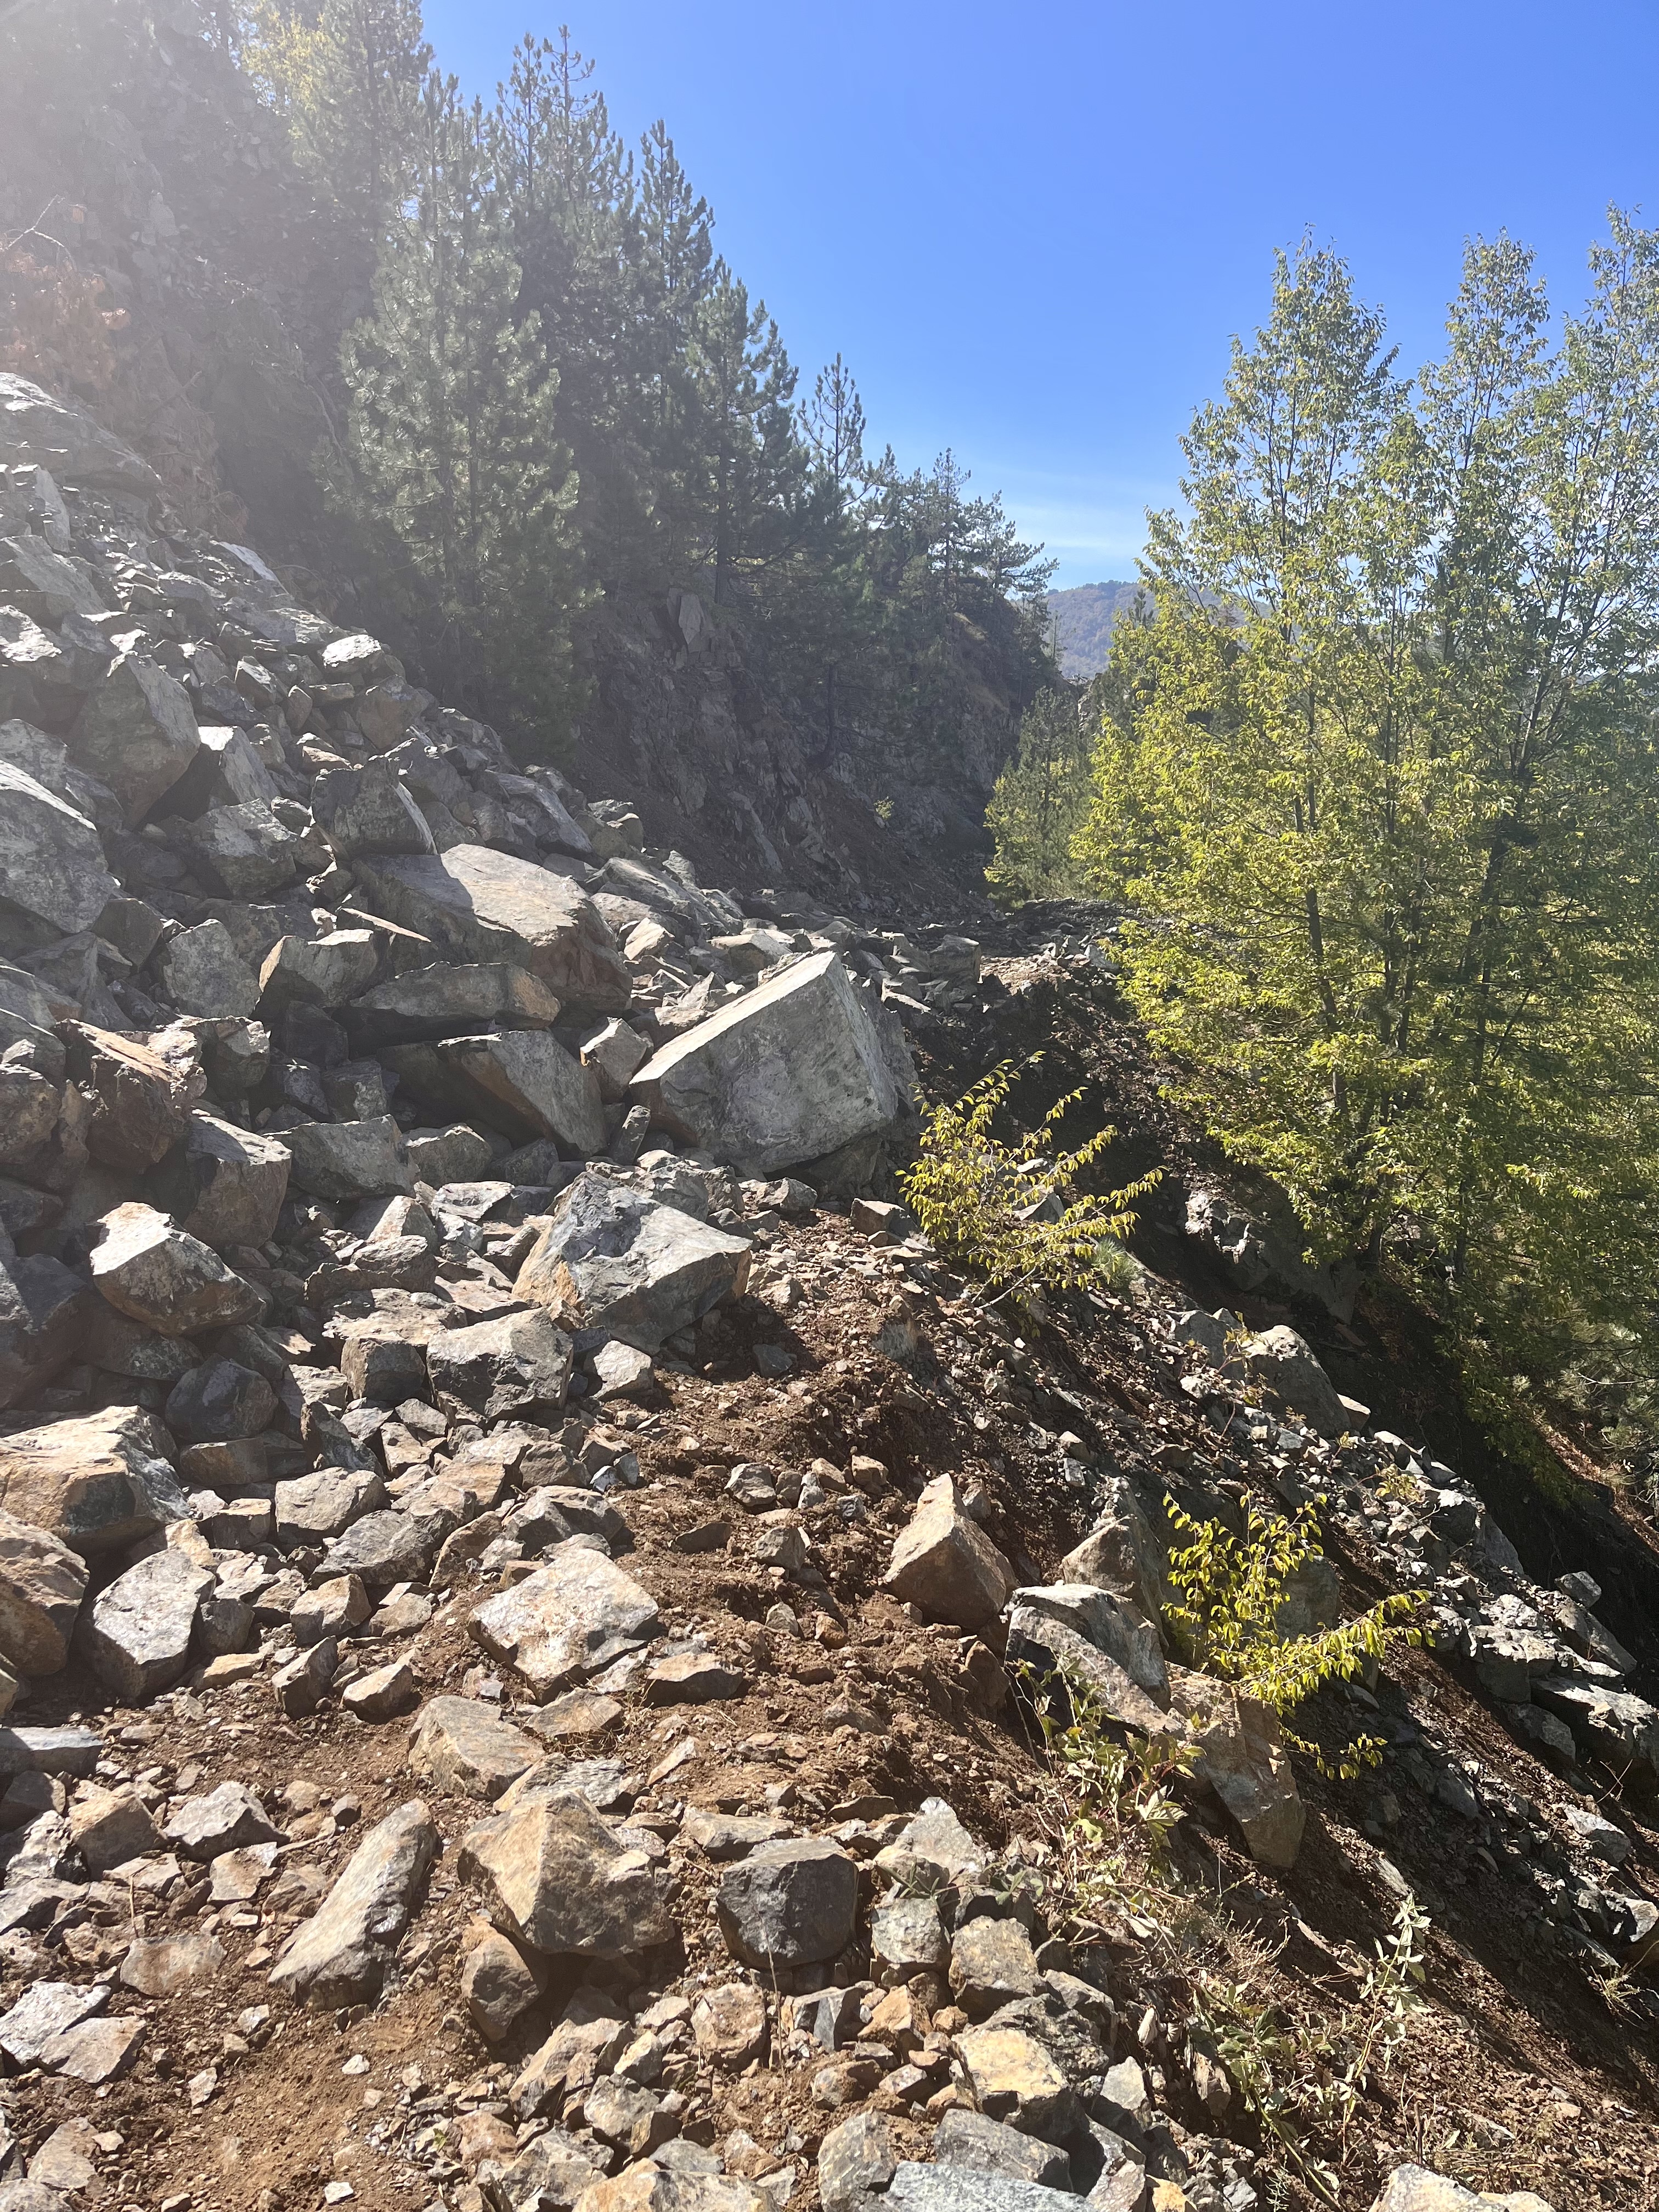 This rock slide completely blocked the trail